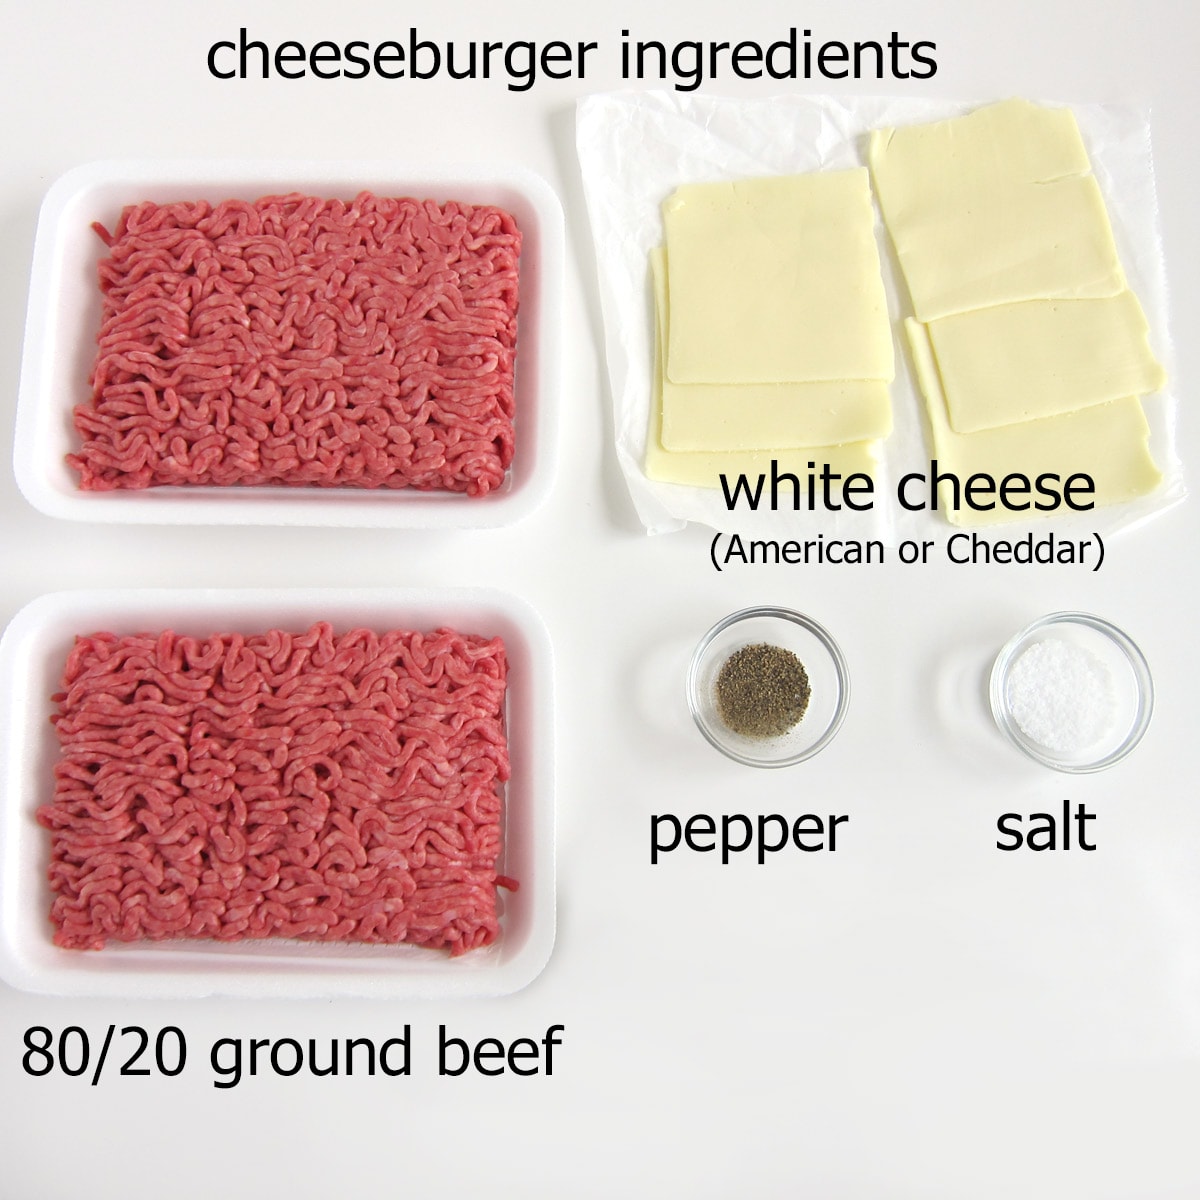 cheeseburger ingredients including ground beef, cheese, pepper, and salt.